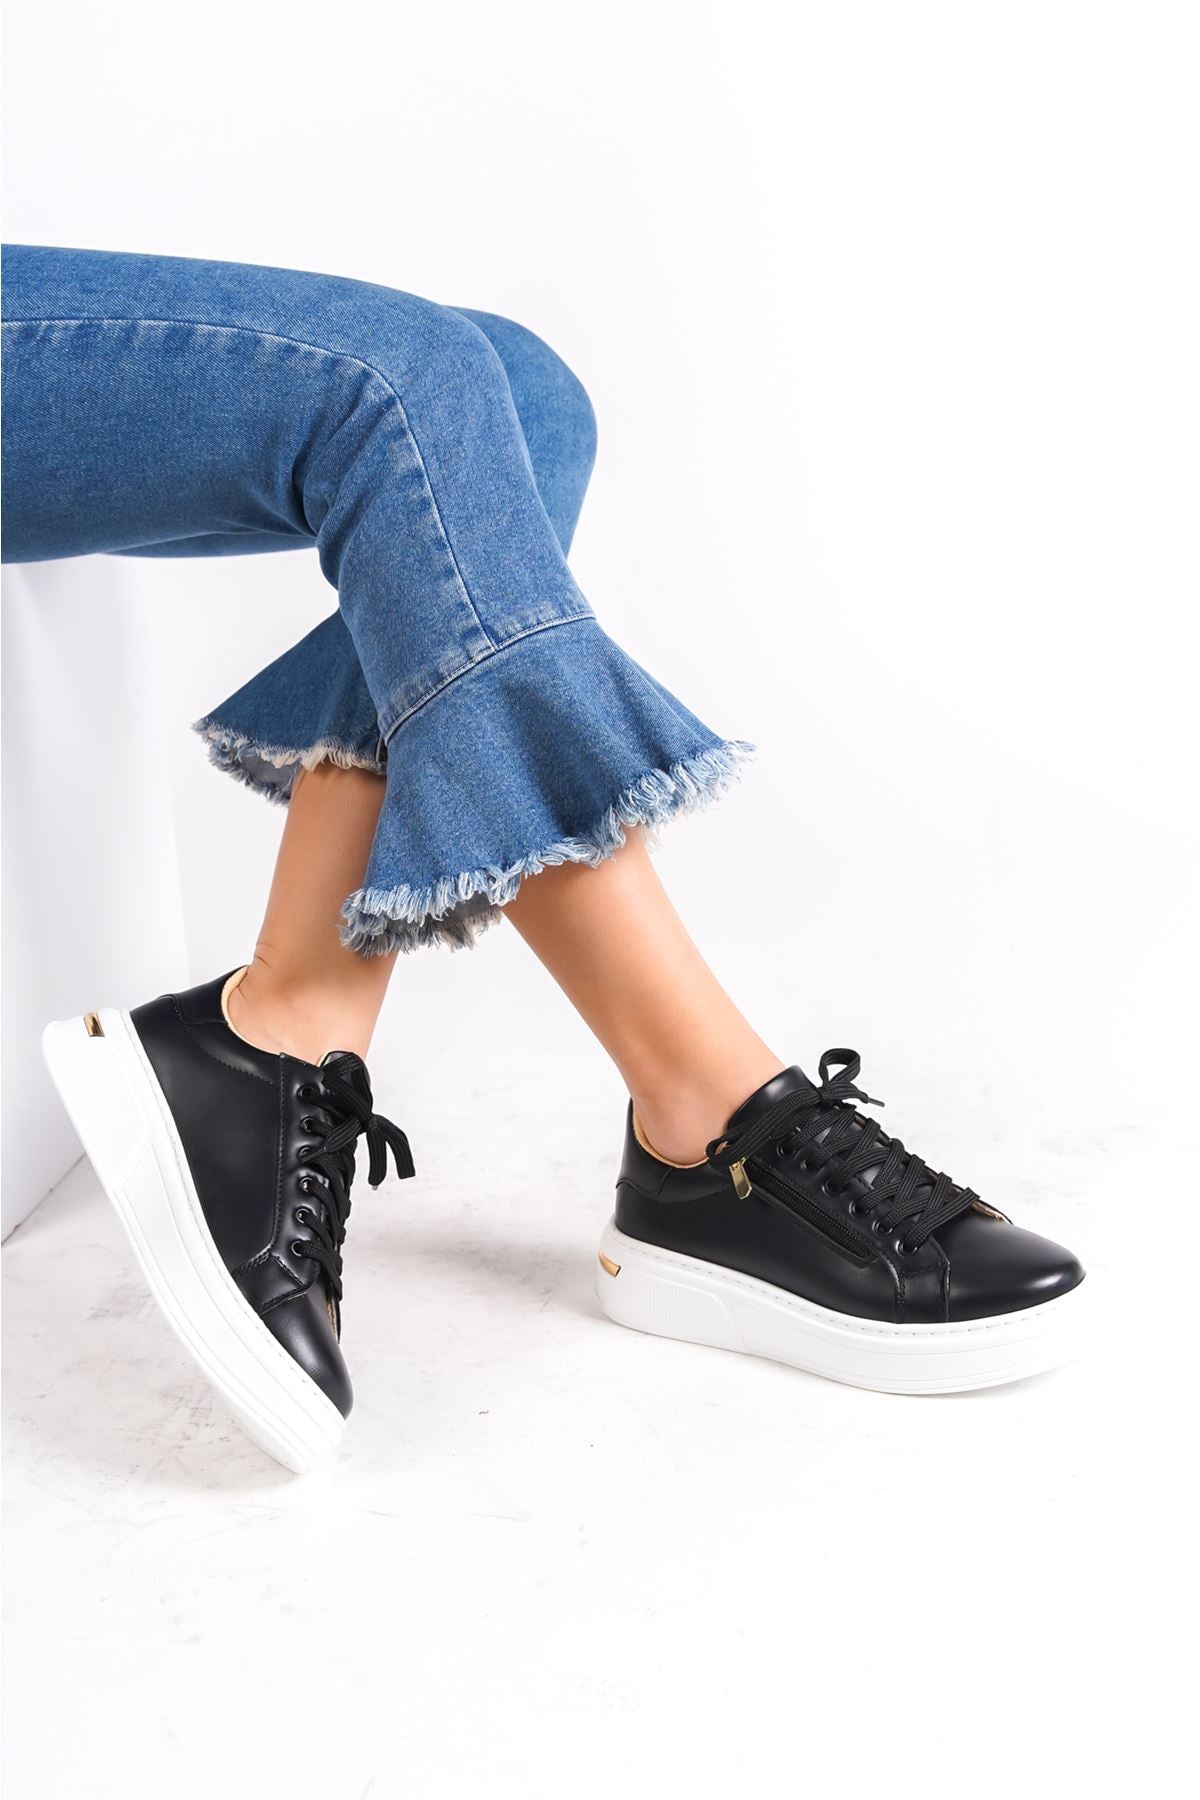 Lace-up Black Women's Sports Shoes - STREETMODE™